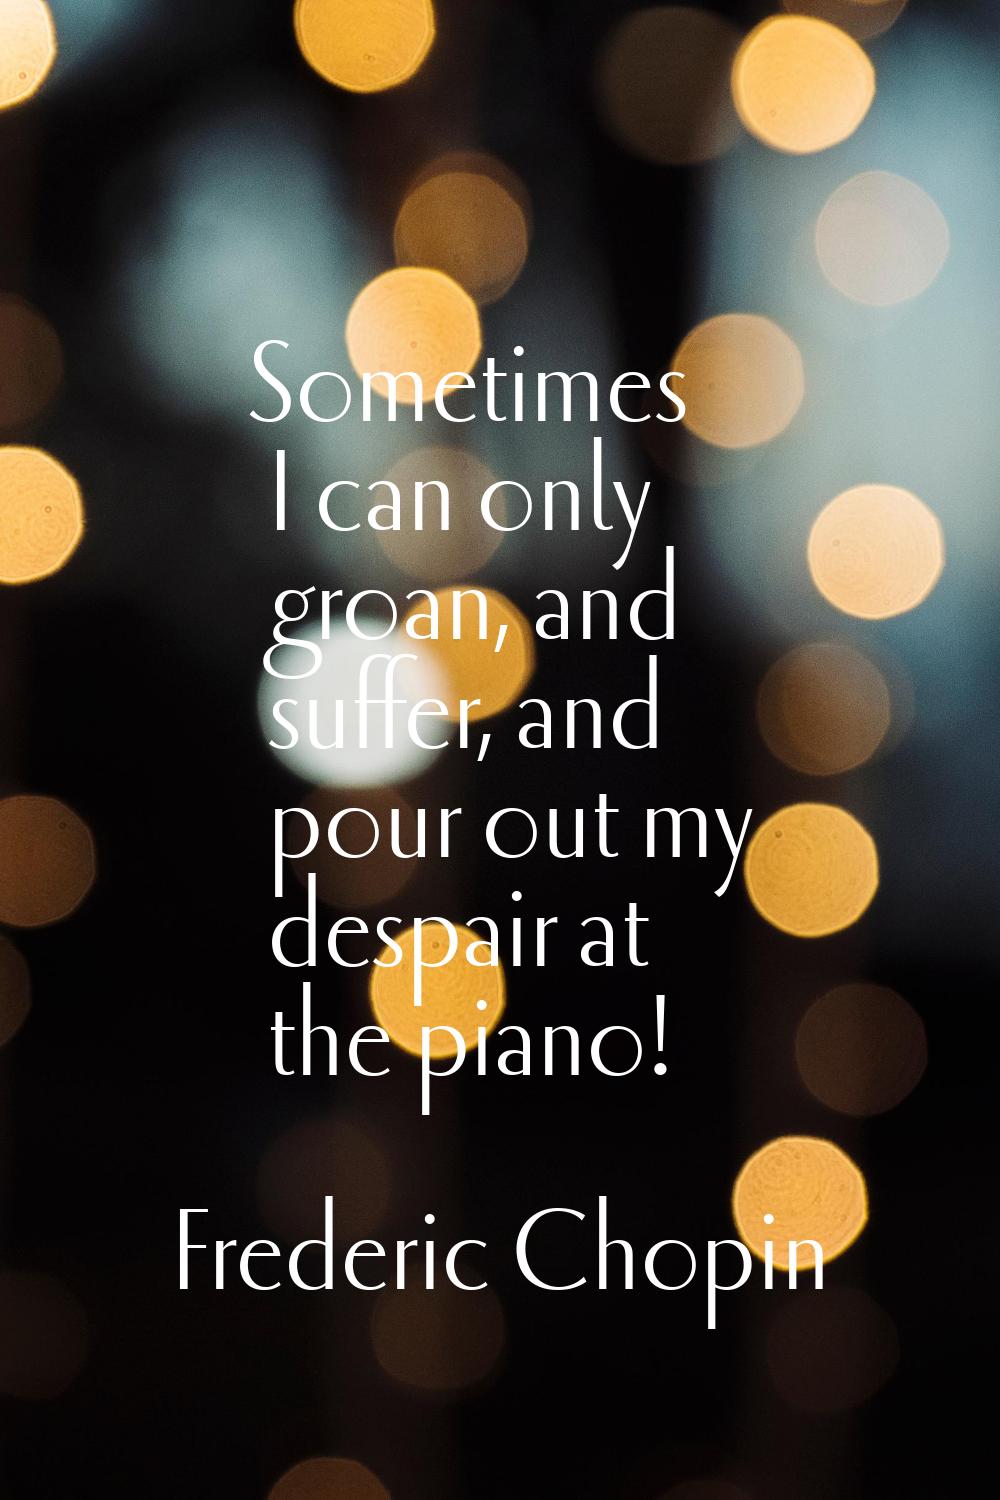 Sometimes I can only groan, and suffer, and pour out my despair at the piano!